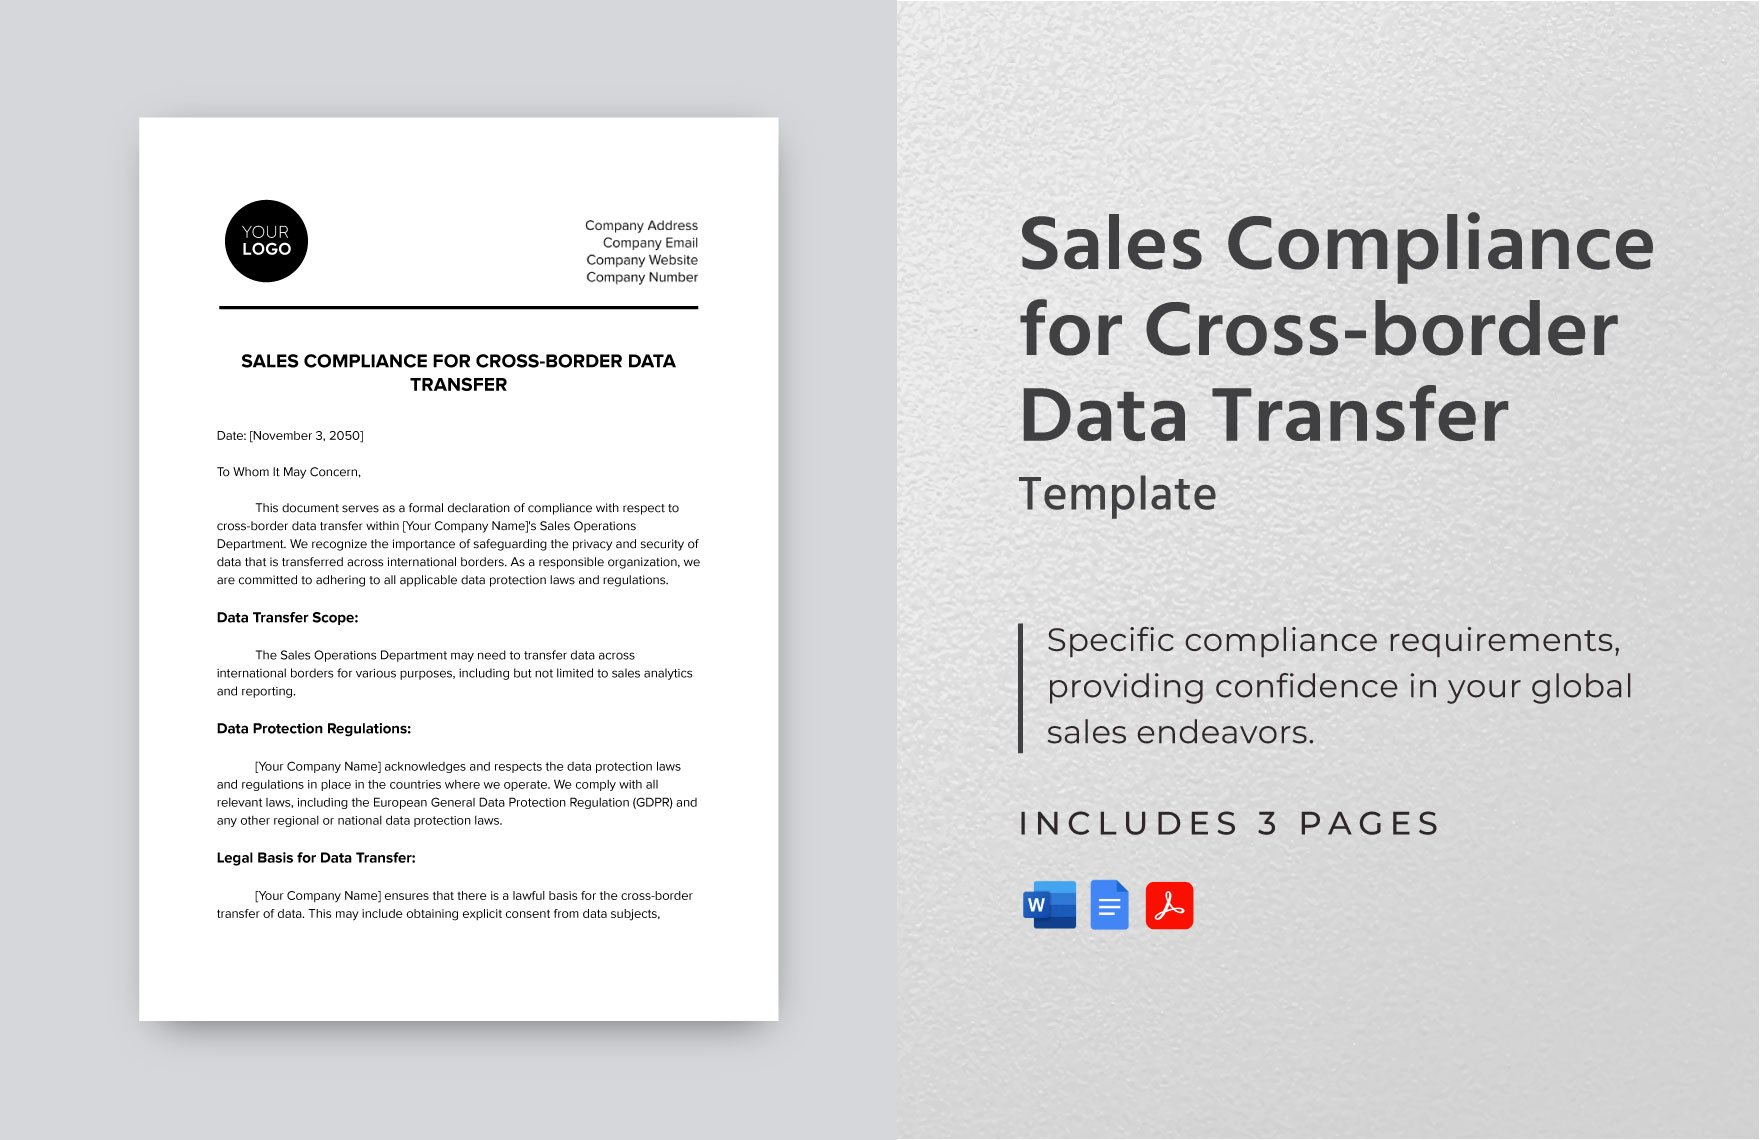 Sales Compliance for Cross-border Data Transfer Template